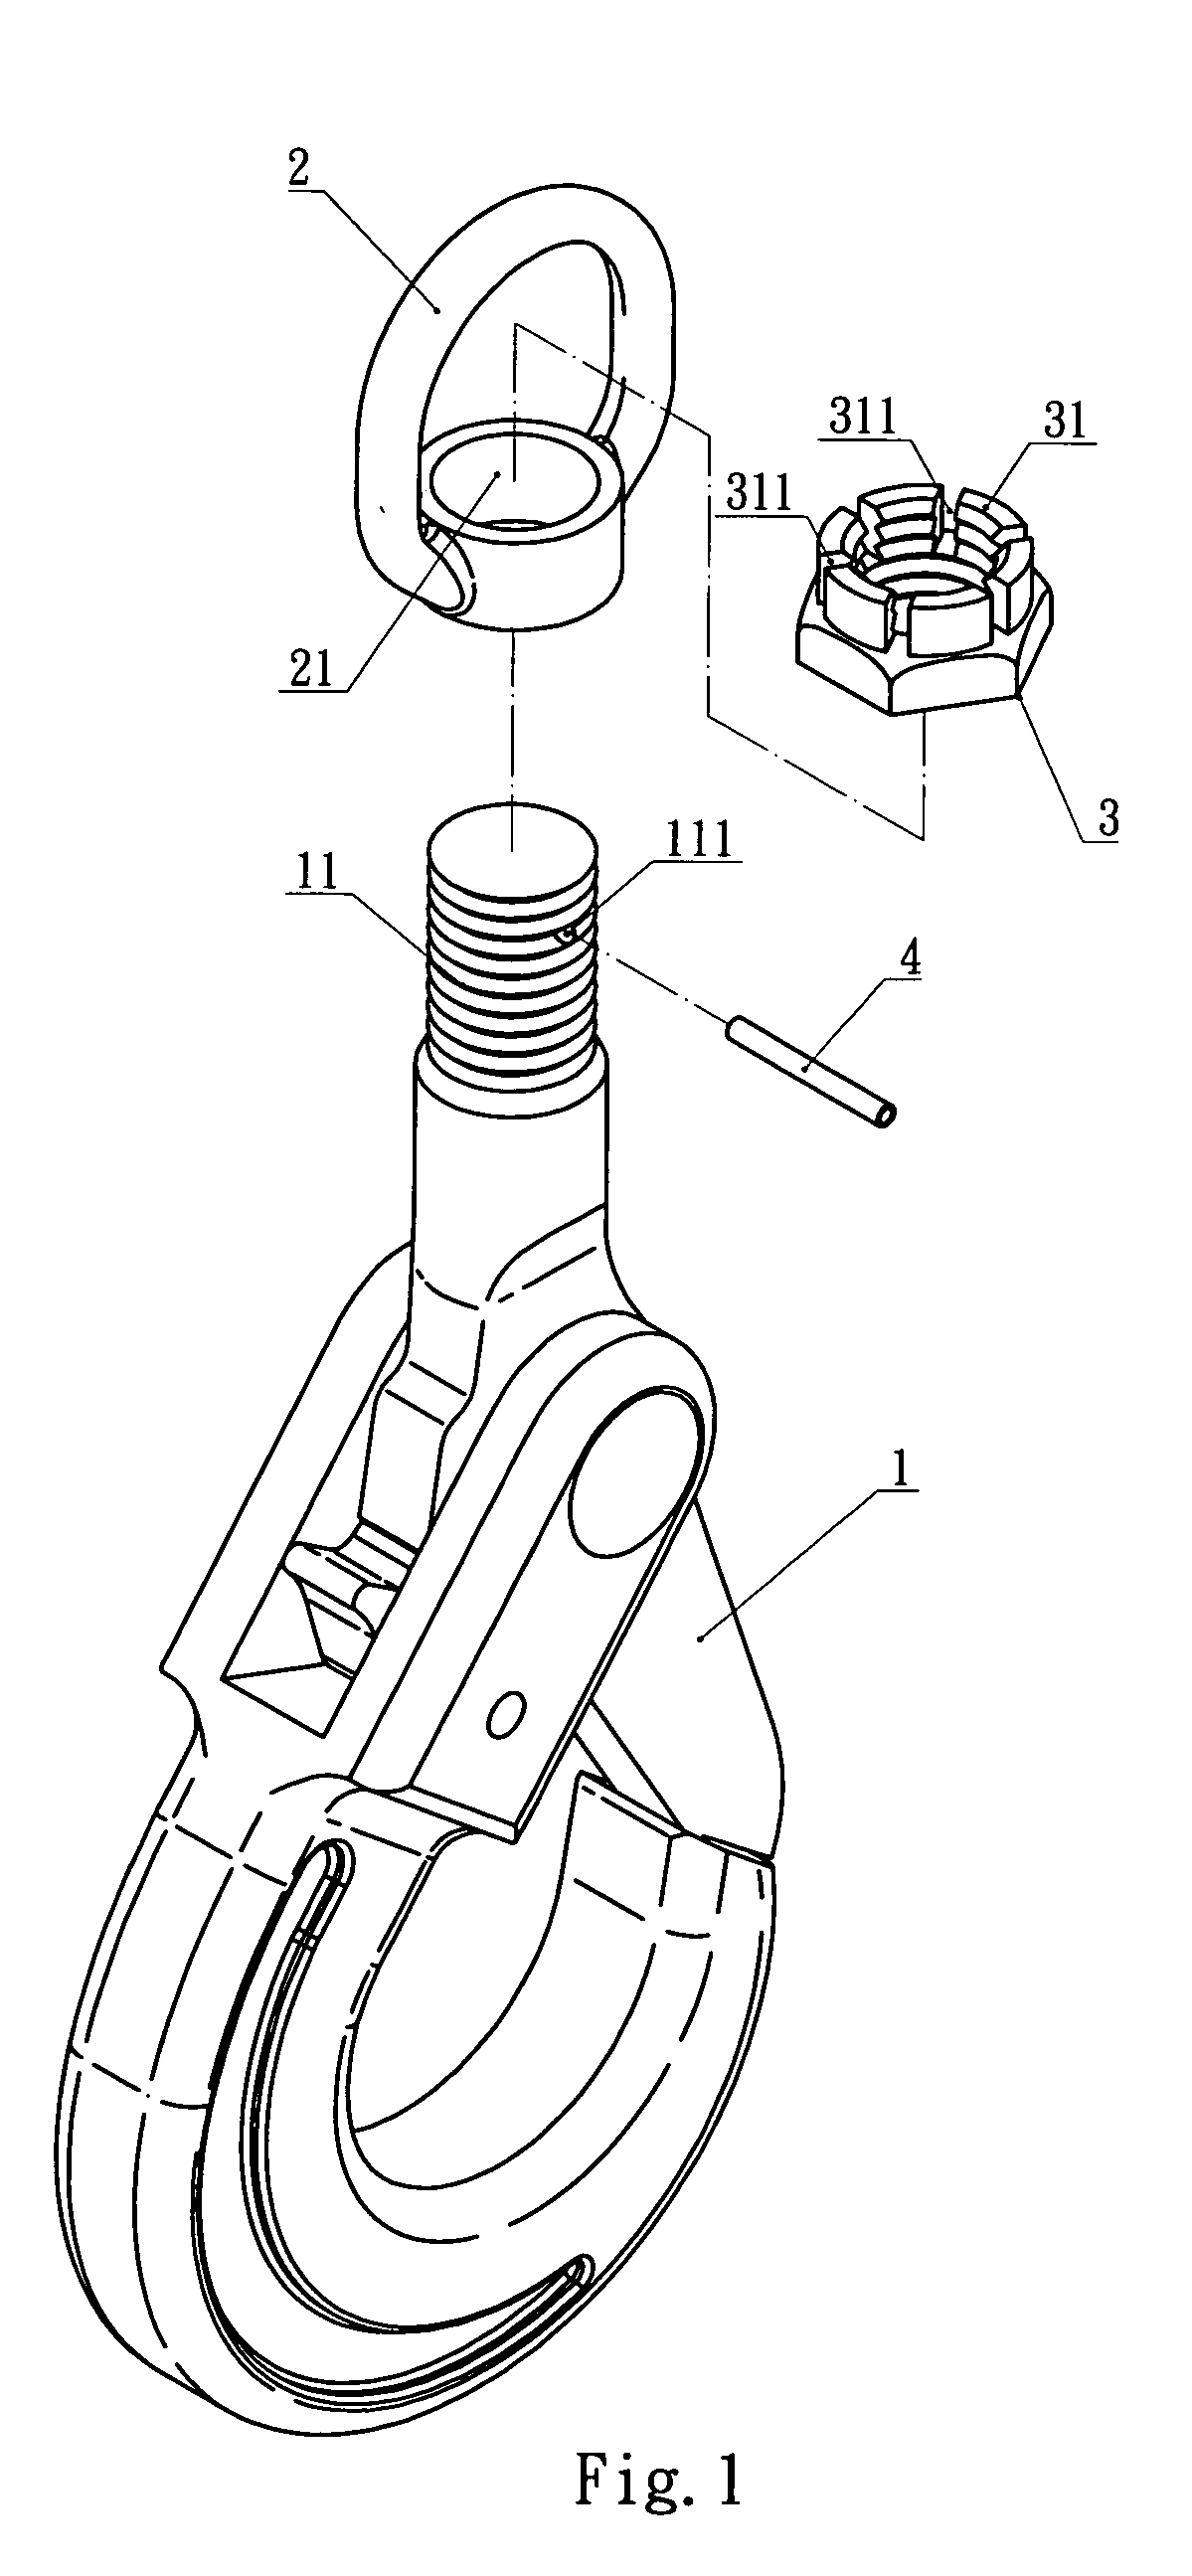 Locking structure for combing a hook and a hanging ring